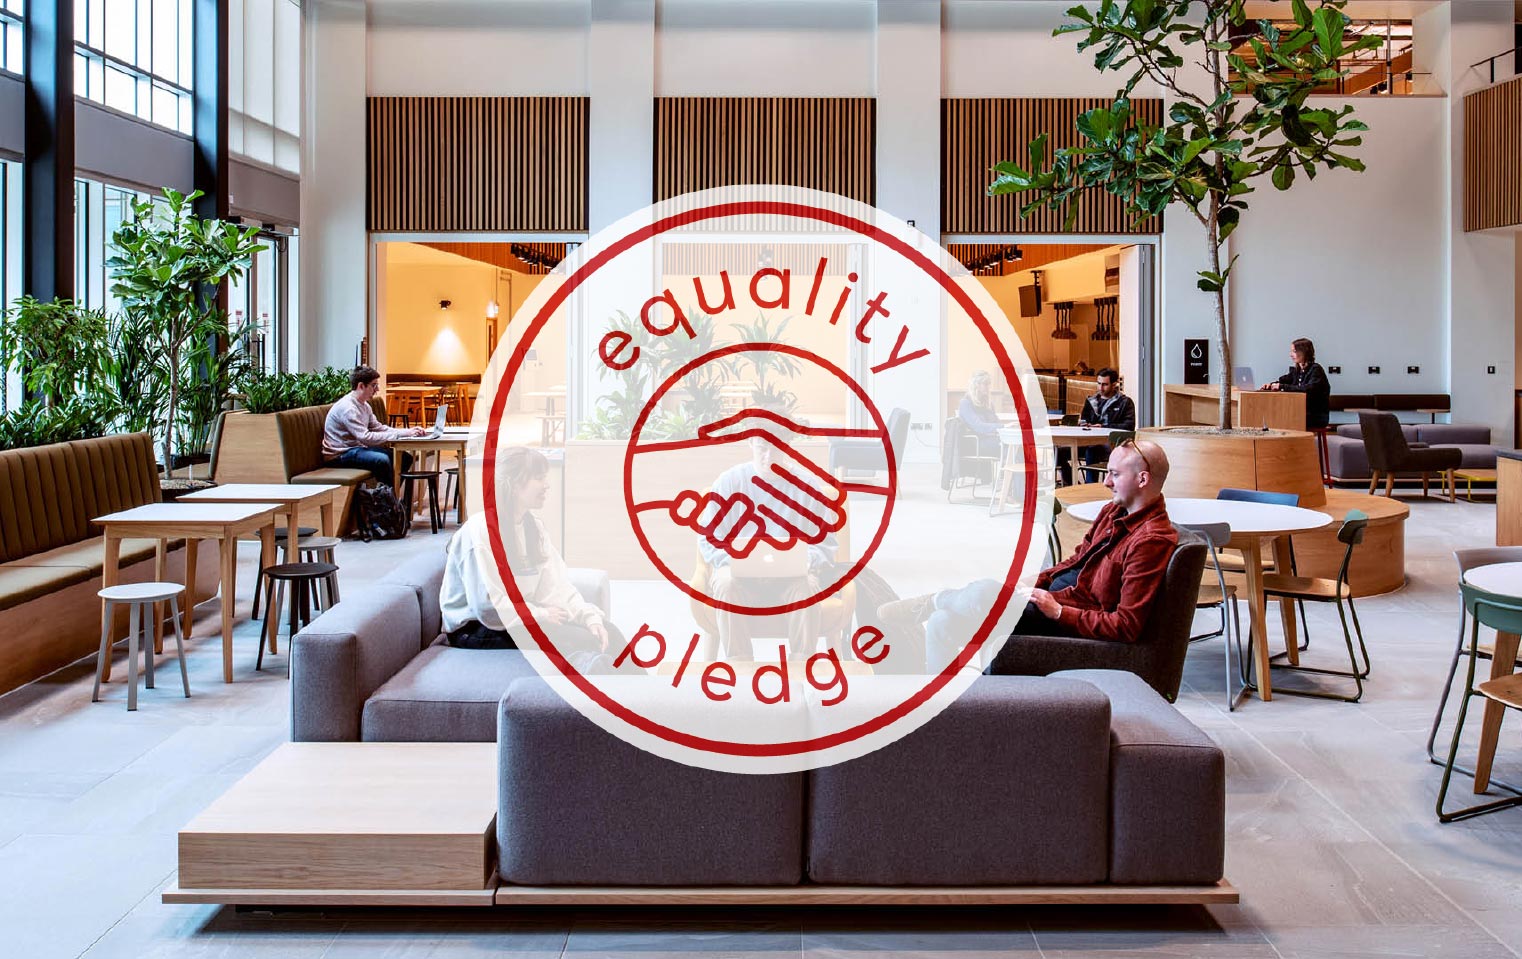 Equality Pledge - We’re making a positive commitment!